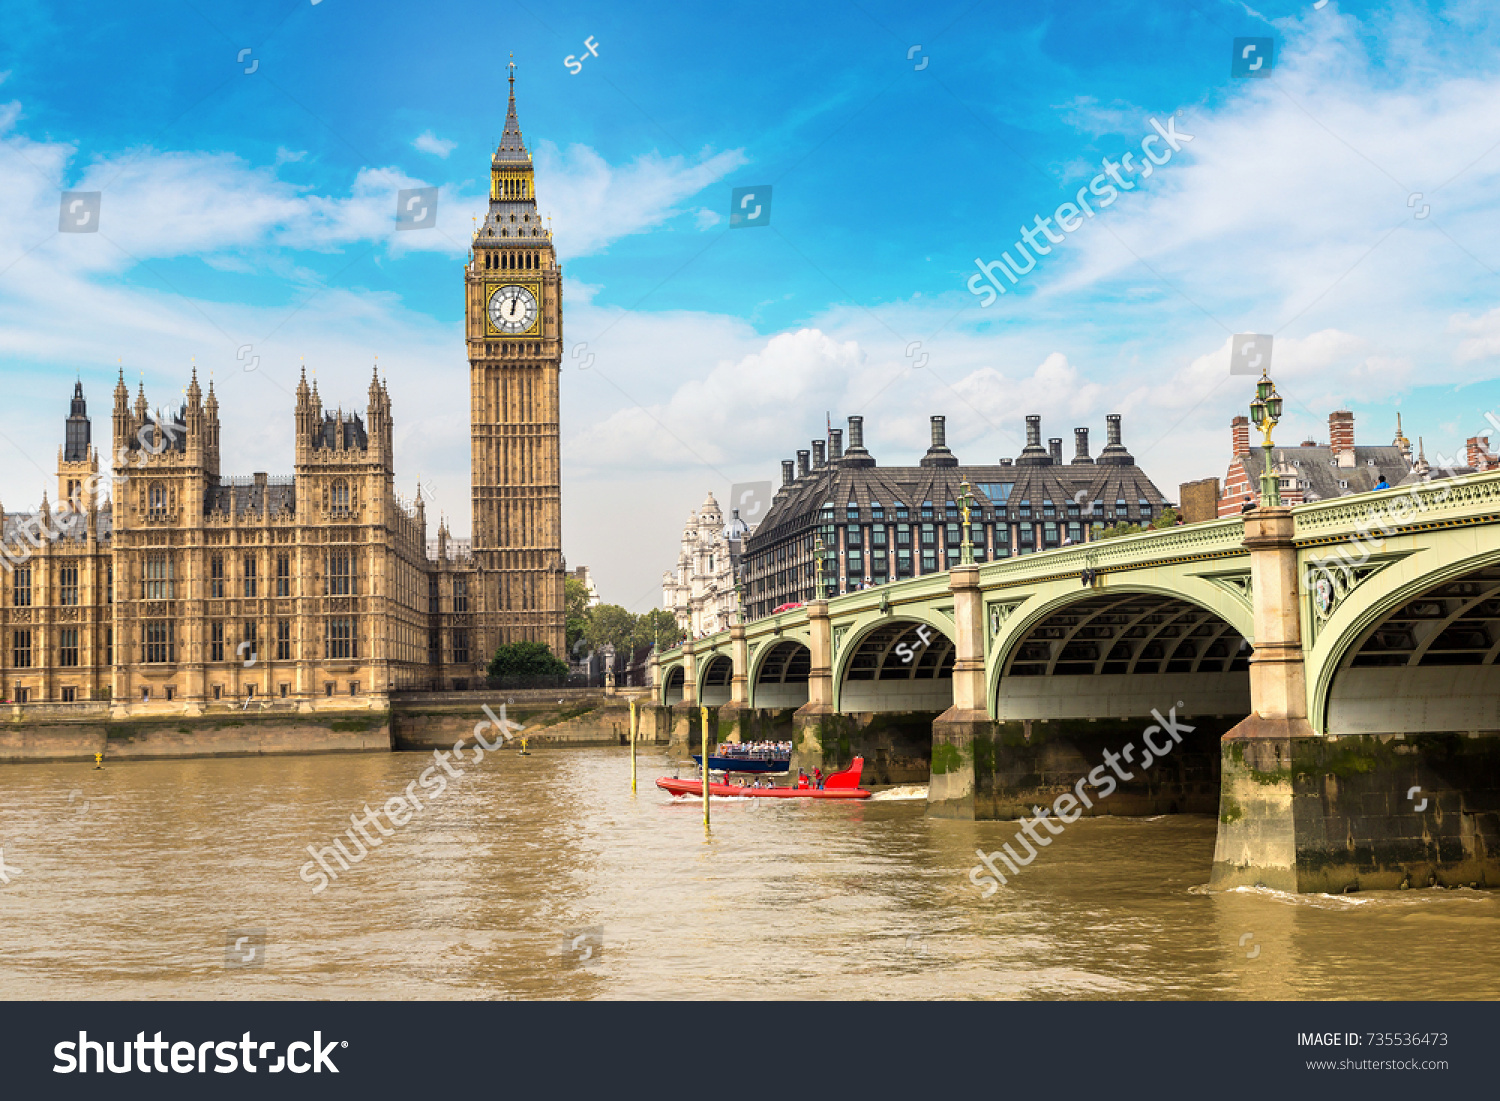 The Big Ben, the Houses of Parliament and Westminster bridge in London in a beautiful summer day, England, United Kingdom #735536473